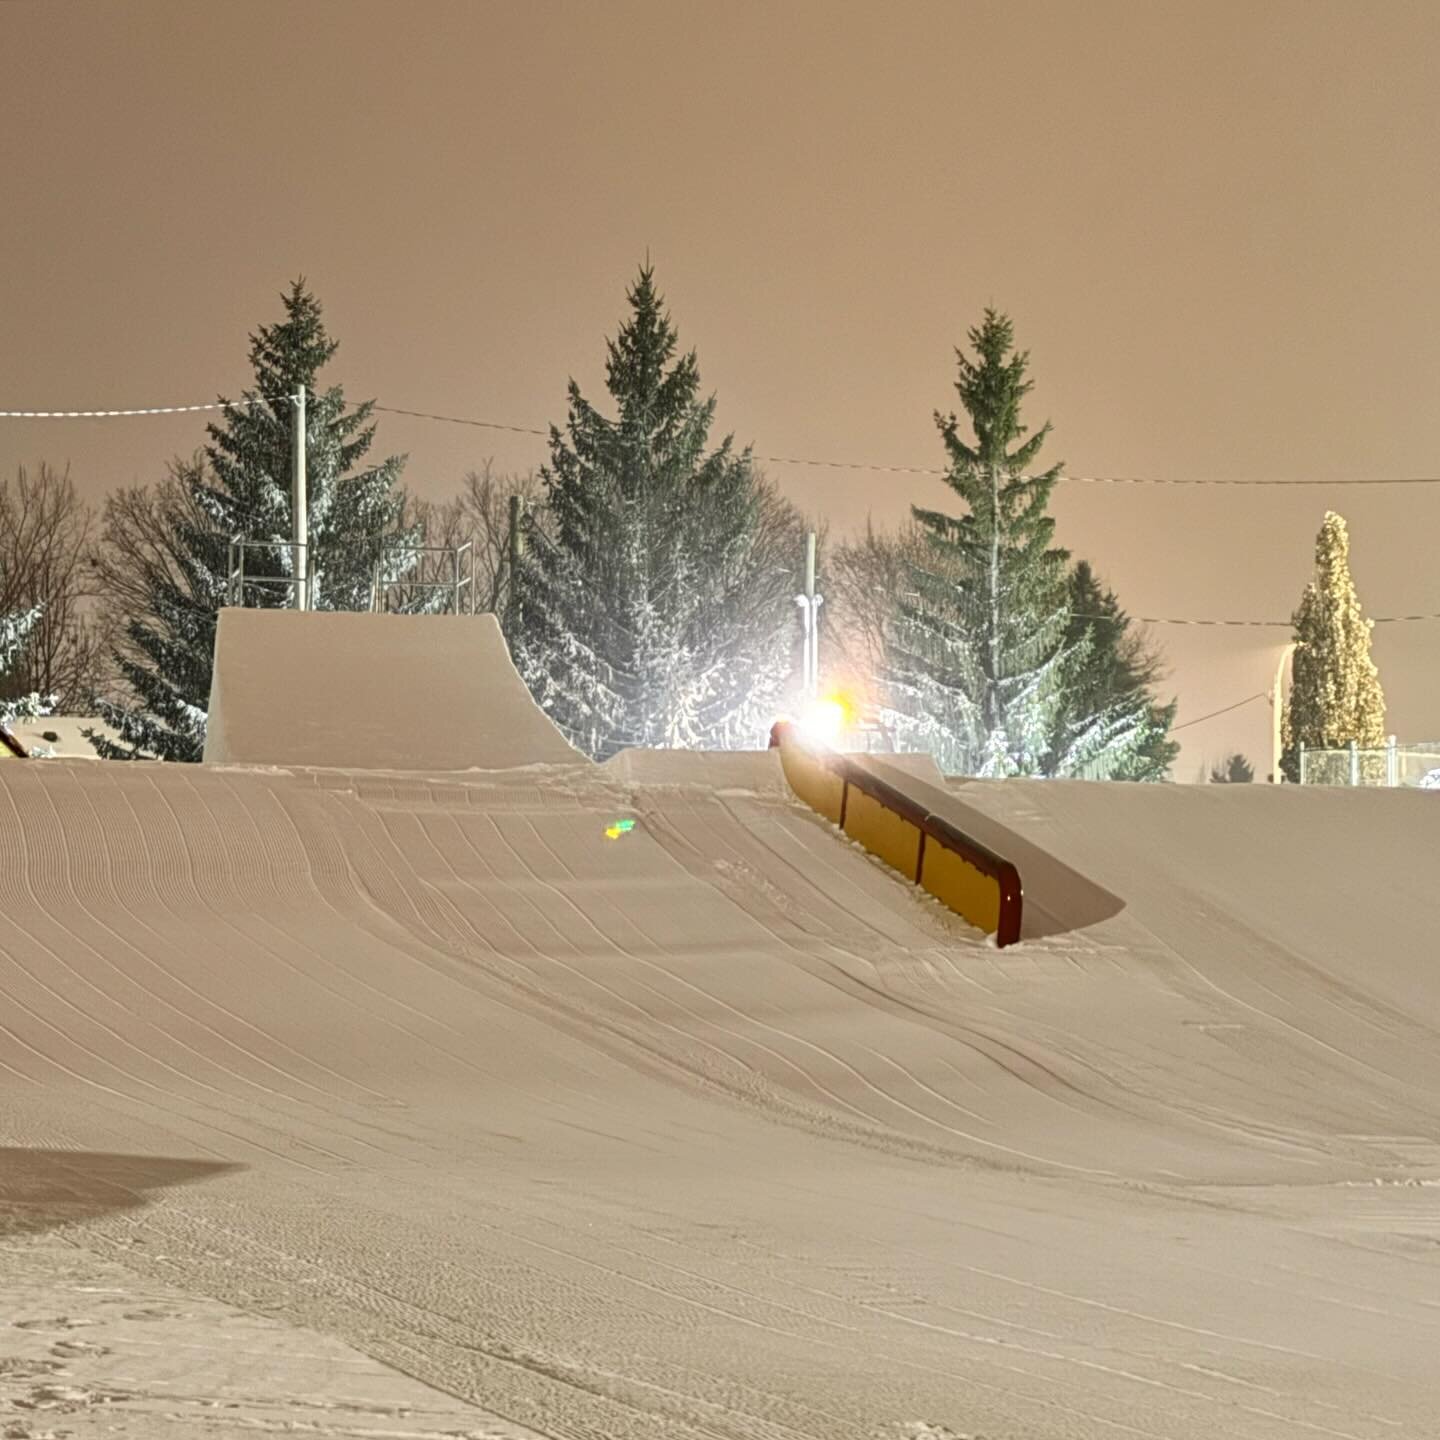 Victoriaville snowpark is ready for you to go crazy at with 1 jump and 5 rails &amp; boxes. 😎